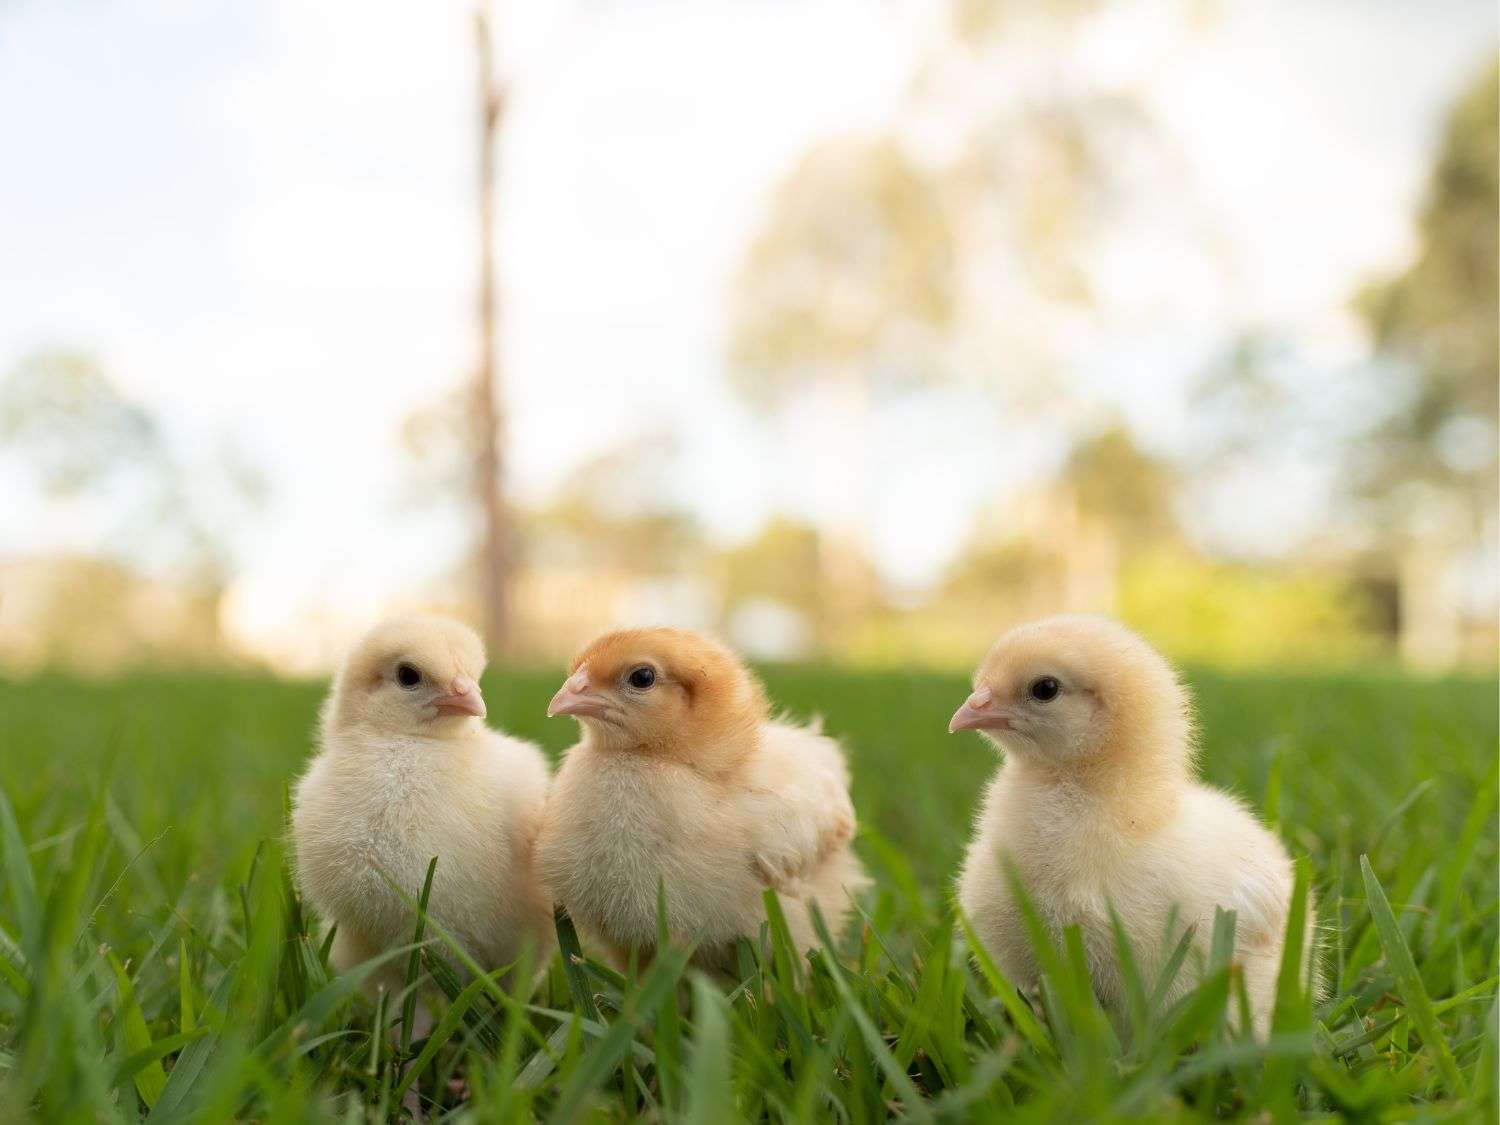 3 yellow chicks outside in the grass